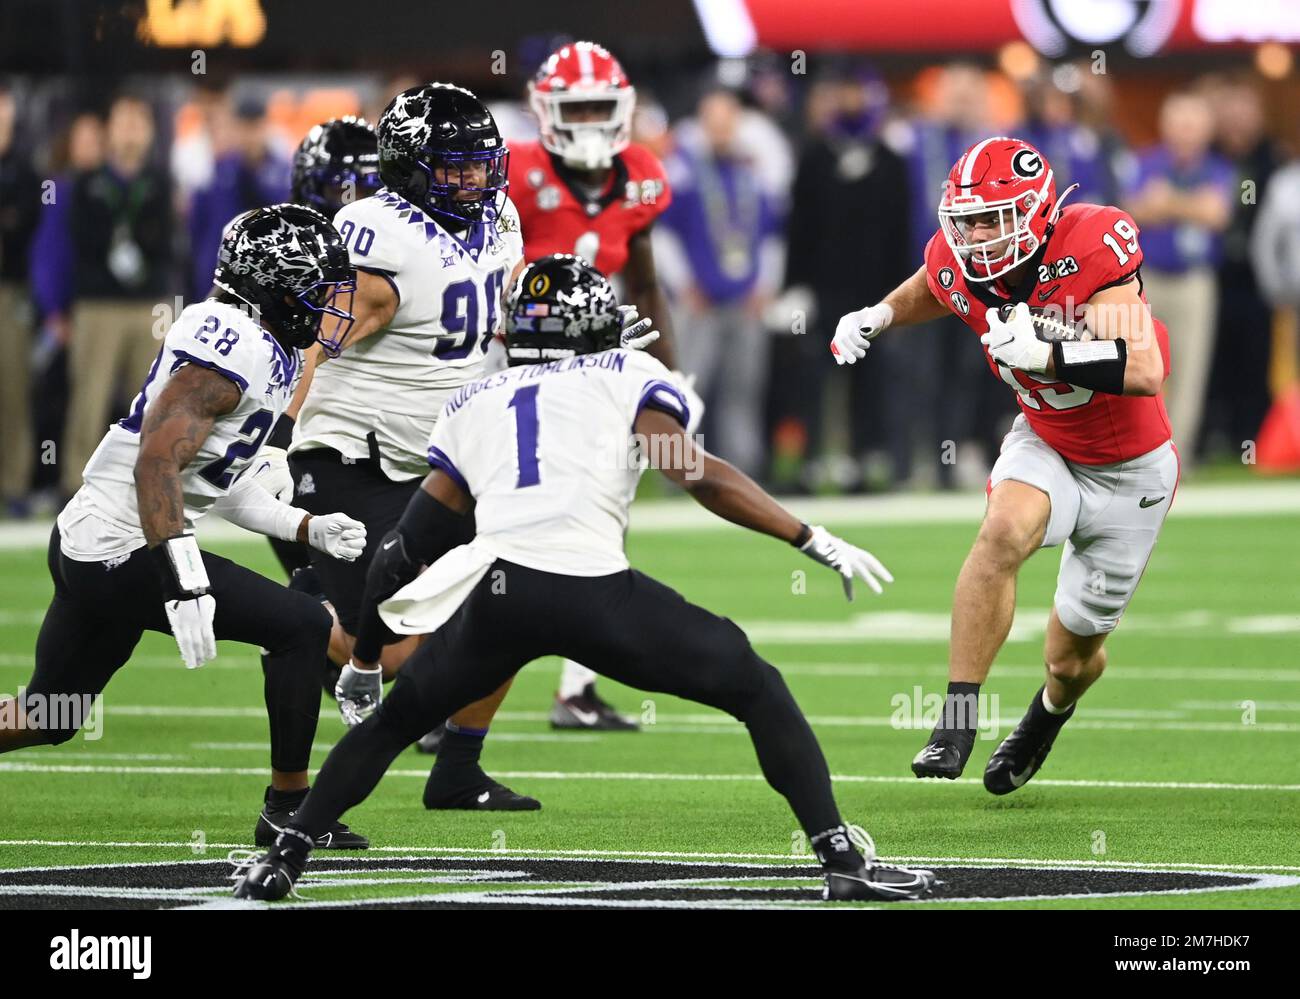 Inglewood, United States. 09th Jan, 2023. Georgia Bulldogs Brock Bowers carries the football in the first quarter against the TCU Horned Frogs at the 2023 NCAA College Football National Championship between Georgia and TCU at SoFi Stadium in Inglewood, California, on Monday, January 9, 2023. Photo by Mike Goulding/UPI Credit: UPI/Alamy Live News Stock Photo